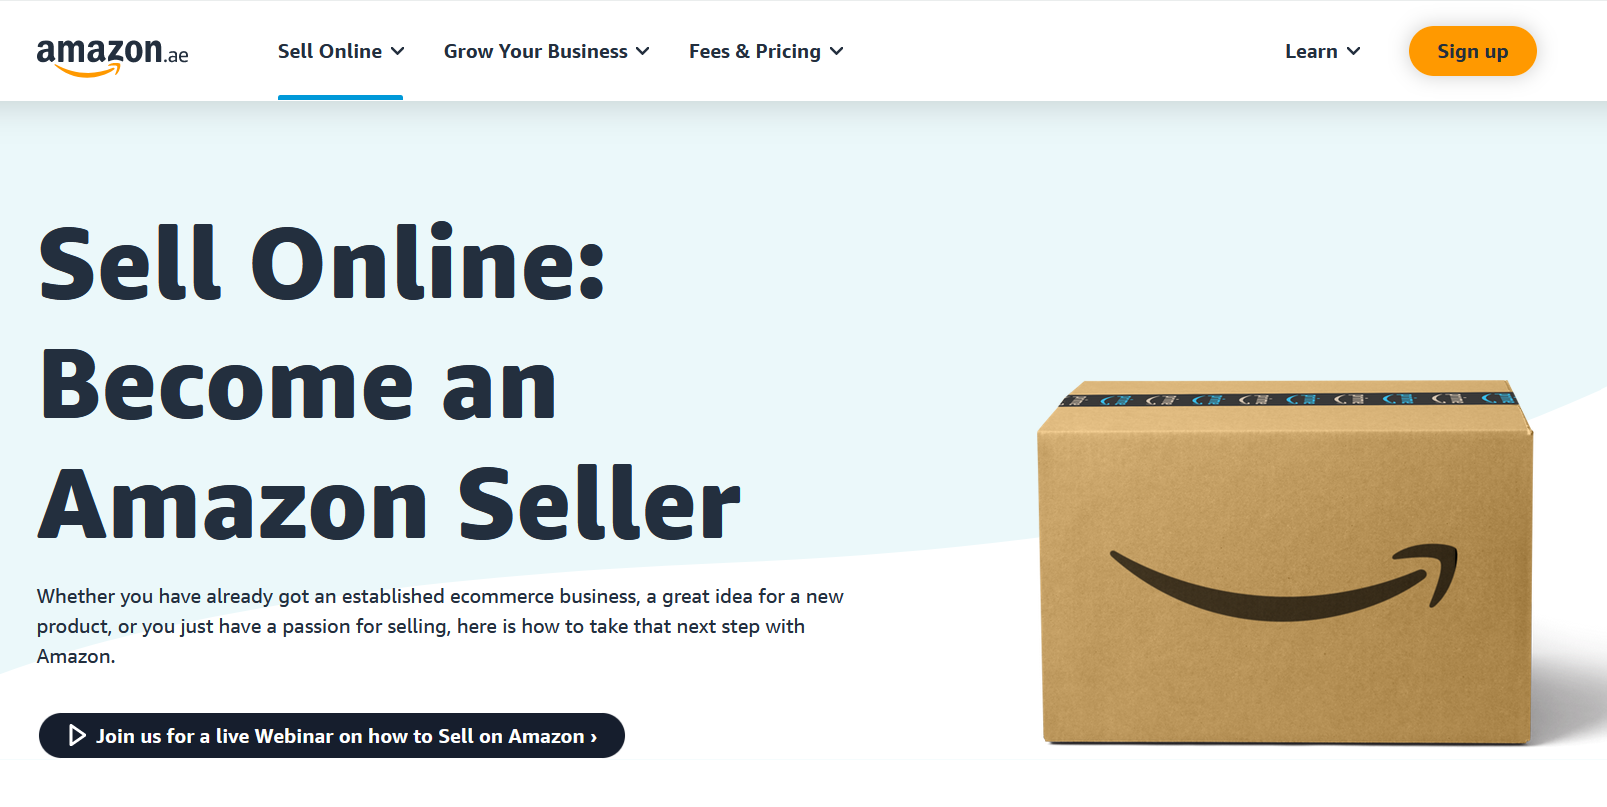 amazon account setup service agency in uae middle east amazon account registration service company